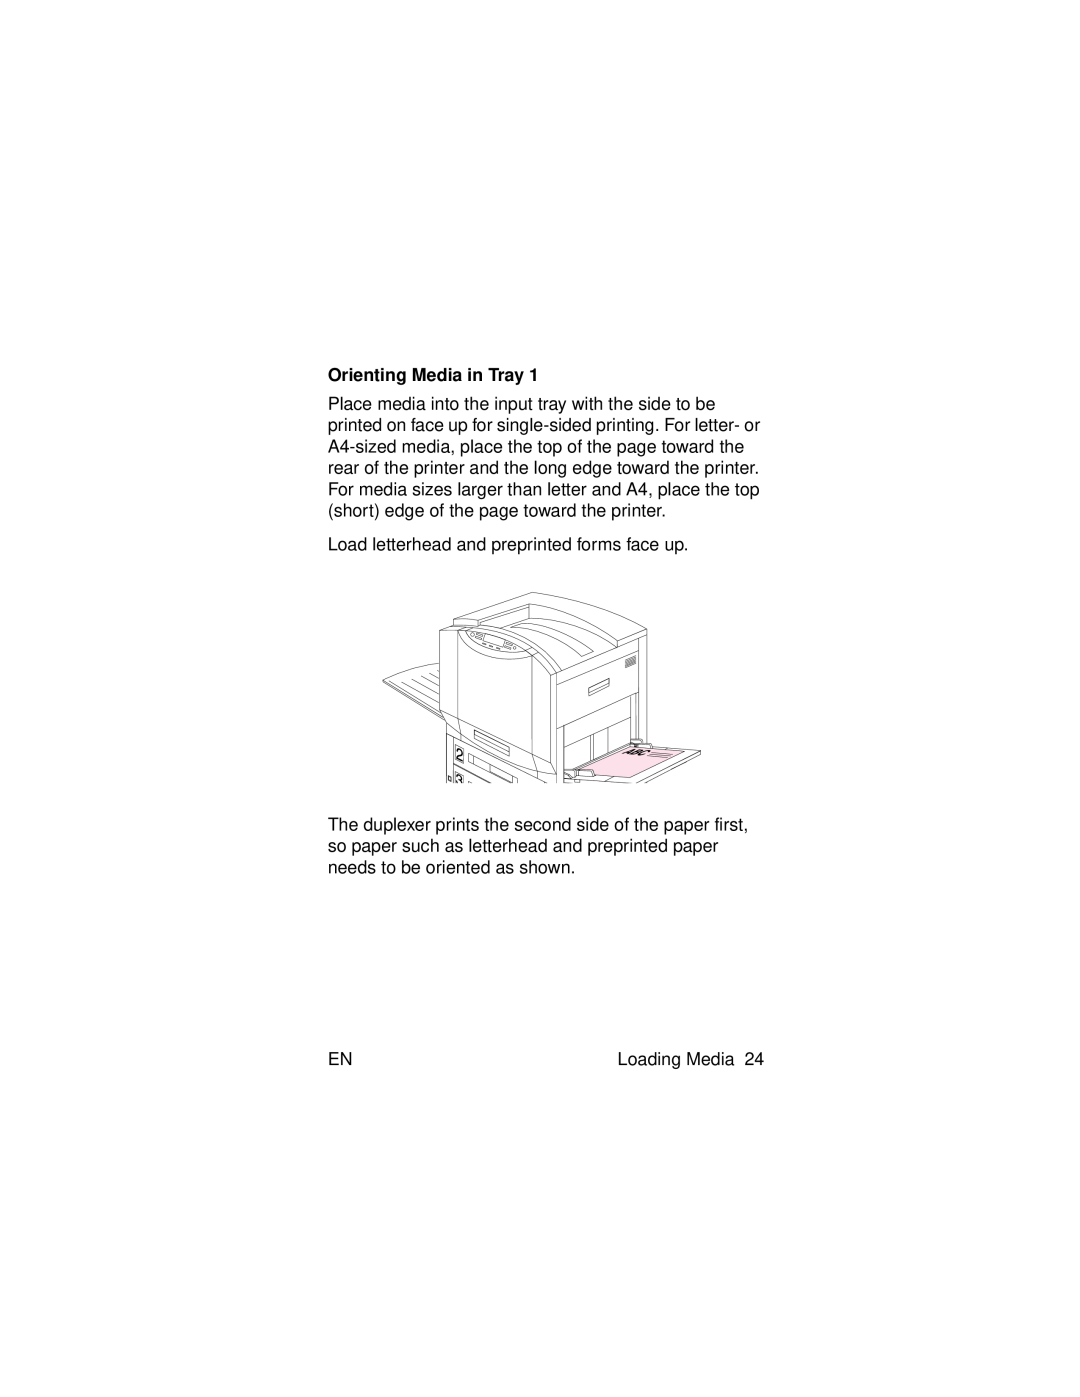 HP 8000 s manual Orienting Media in Tray 